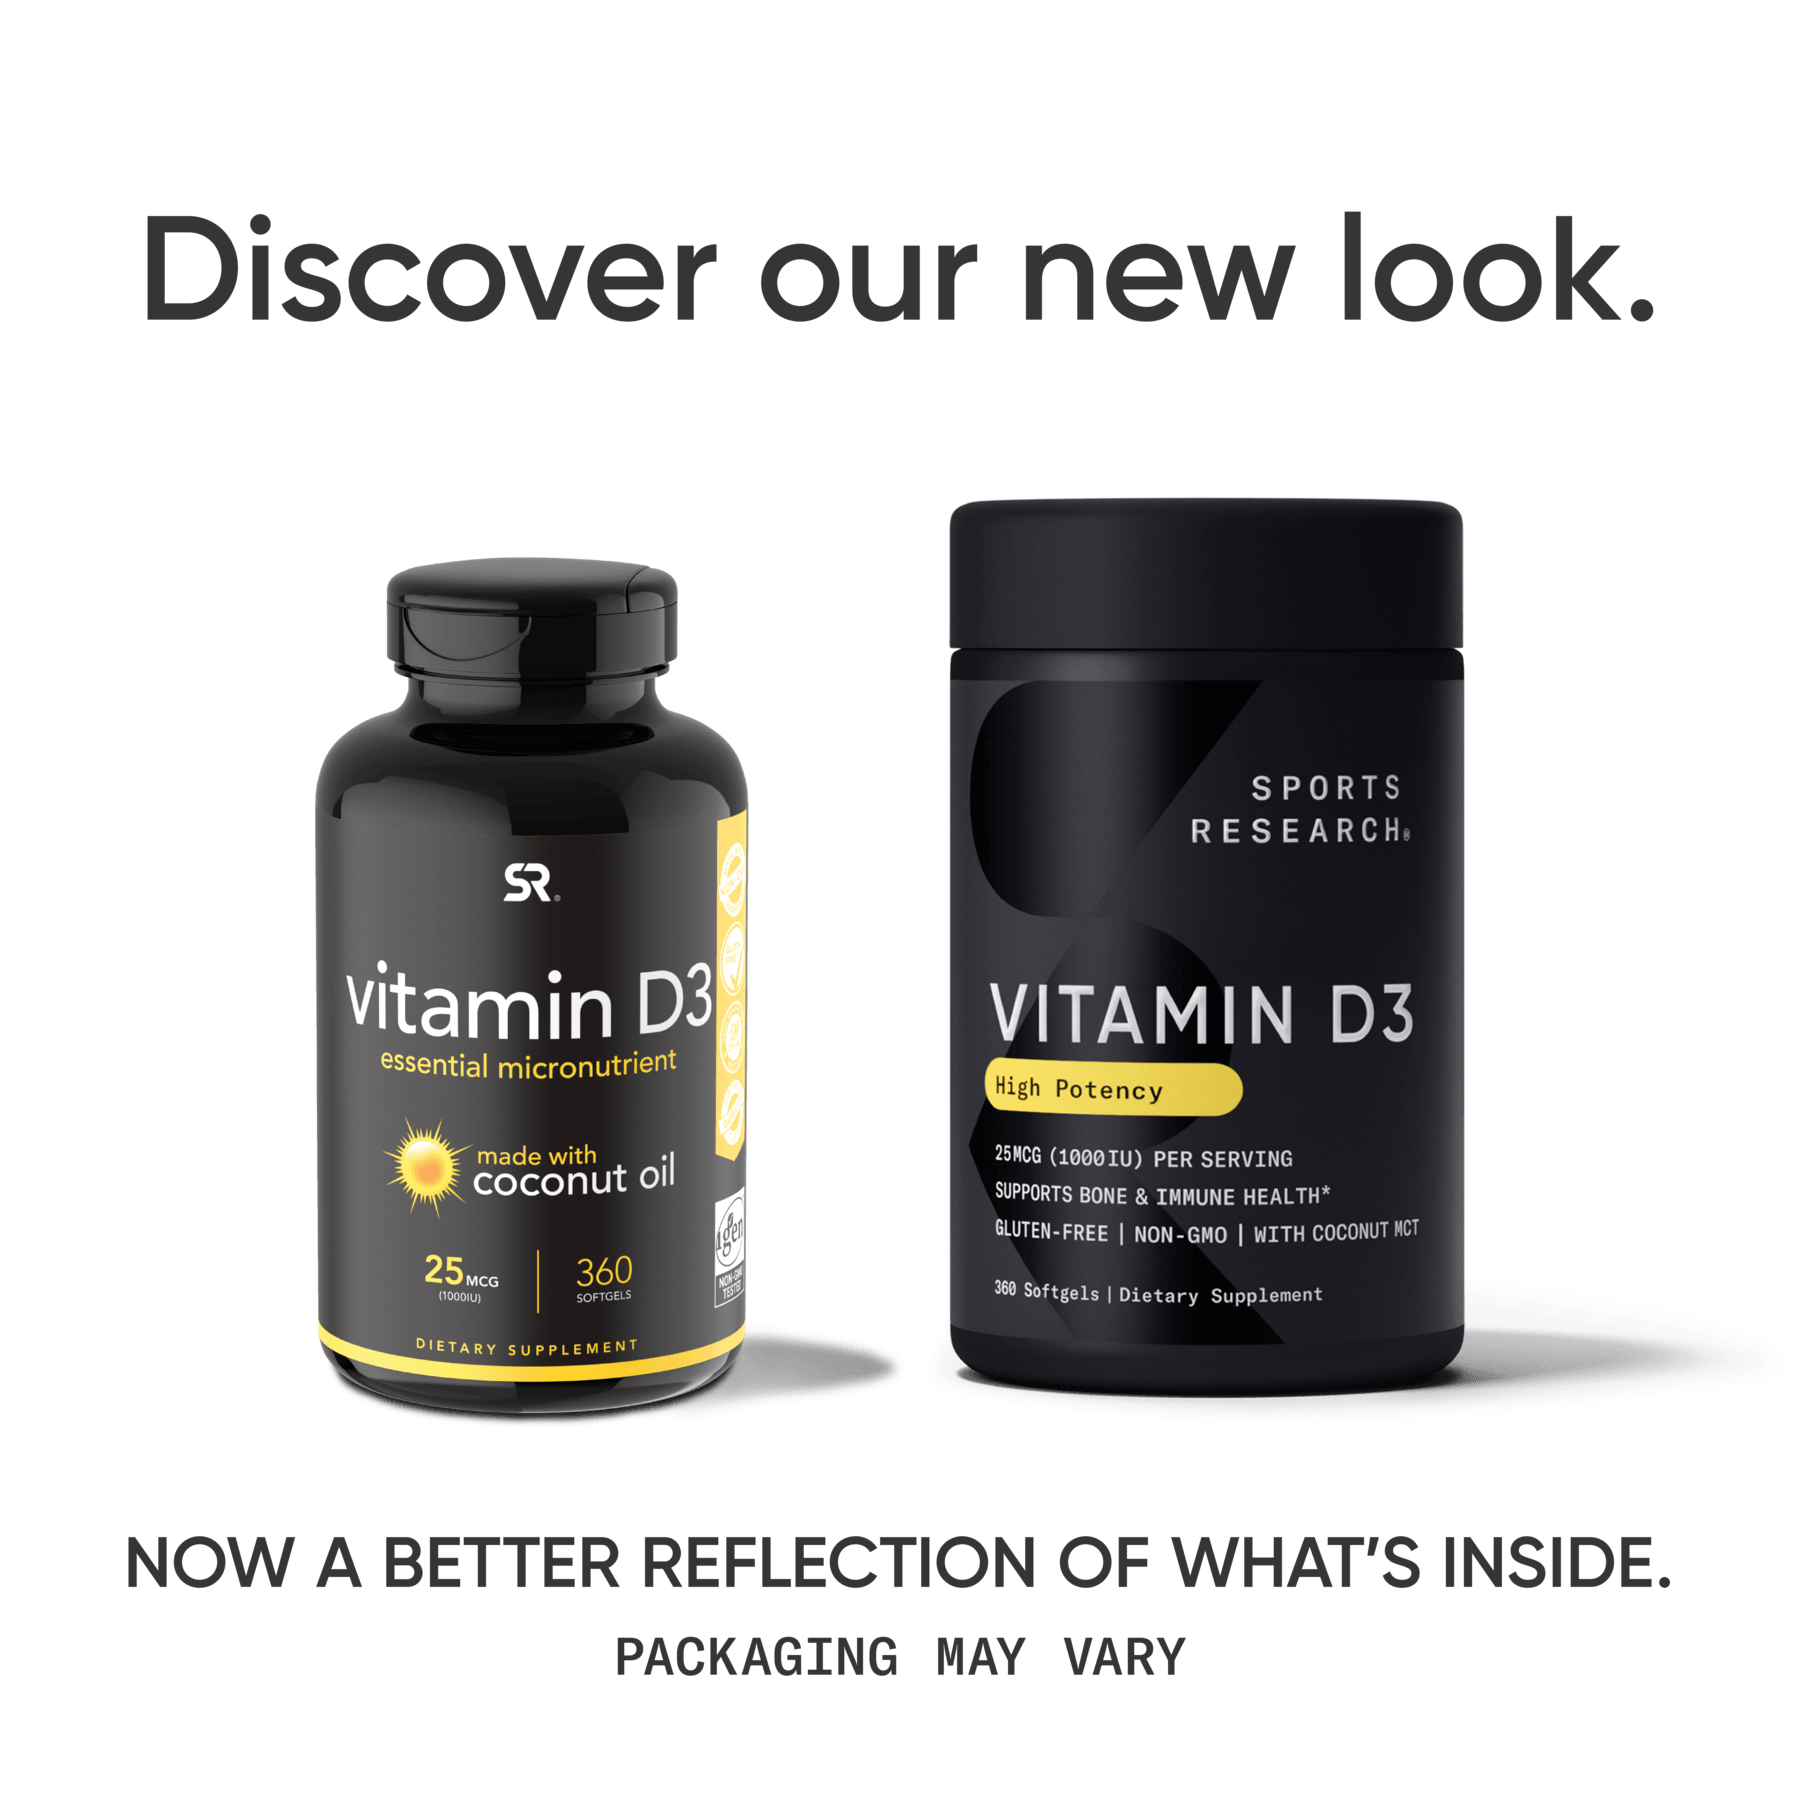 Vitamin D3 with Coconut MCT Oil - Sports Research, new look.